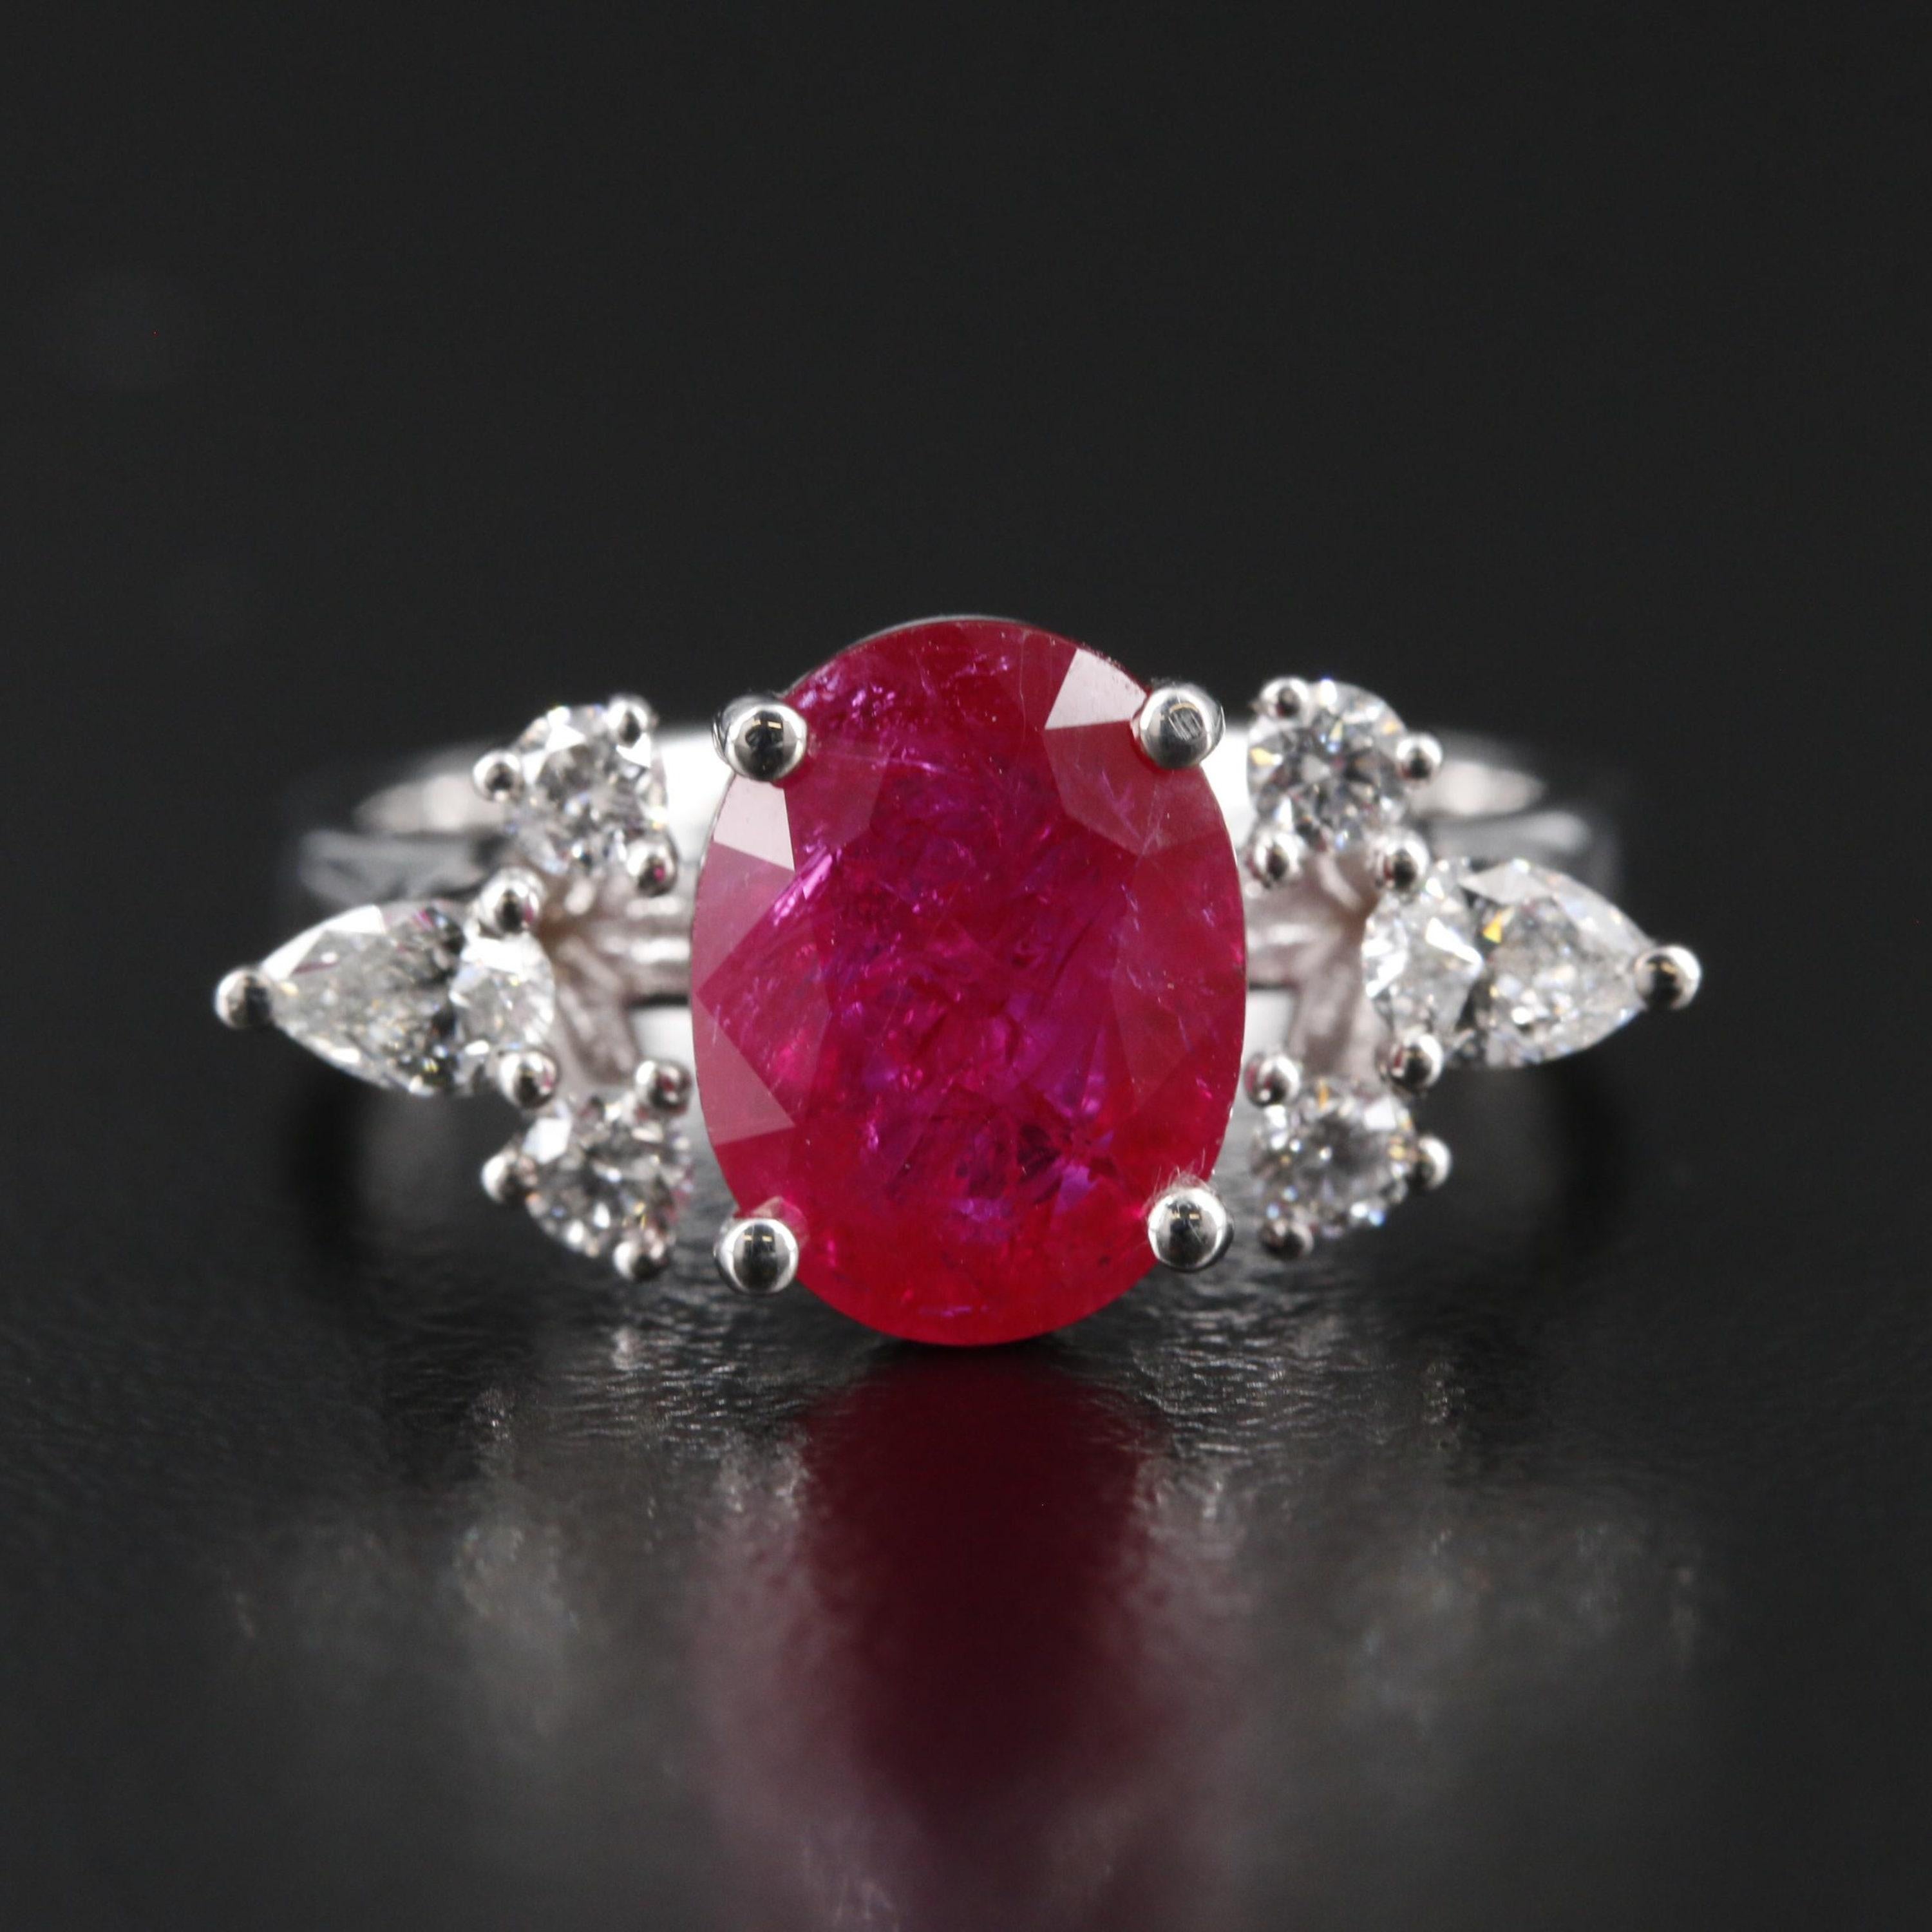 For Sale:  2 Carat Oval Cut Ruby Engagement Ring Antique Victorian Ruby Ruby Wedding Ring 6